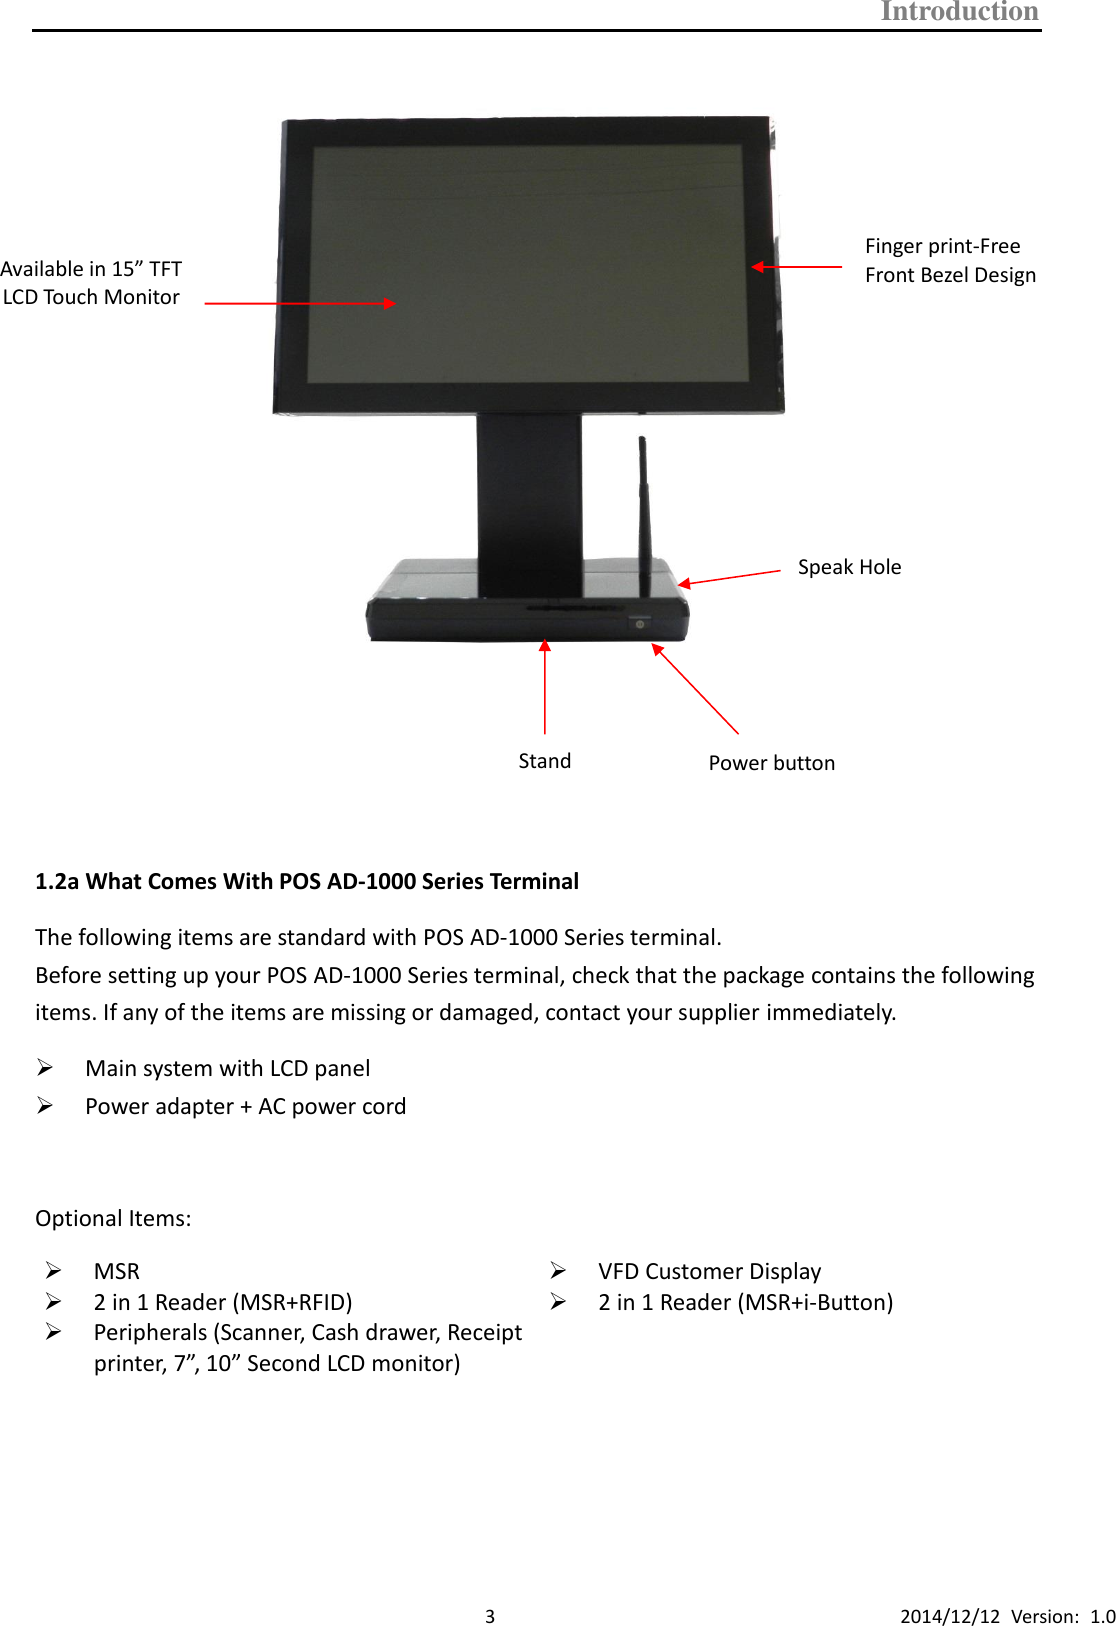 Introduction      3 2014/12/12  Version:  1.0              1.2a What Comes With POS AD-1000 Series Terminal The following items are standard with POS AD-1000 Series terminal.   Before setting up your POS AD-1000 Series terminal, check that the package contains the following items. If any of the items are missing or damaged, contact your supplier immediately.  Main system with LCD panel  Power adapter + AC power cord  Optional Items:  MSR    VFD Customer Display  2 in 1 Reader (MSR+RFID)  Peripherals (Scanner, Cash drawer, Receipt printer, 7”, 10” Second LCD monitor)   2 in 1 Reader (MSR+i-Button)        Available in 15” TFT LCD Touch Monitor Finger print-Free Front Bezel Design Speak Hole Stand Power button 